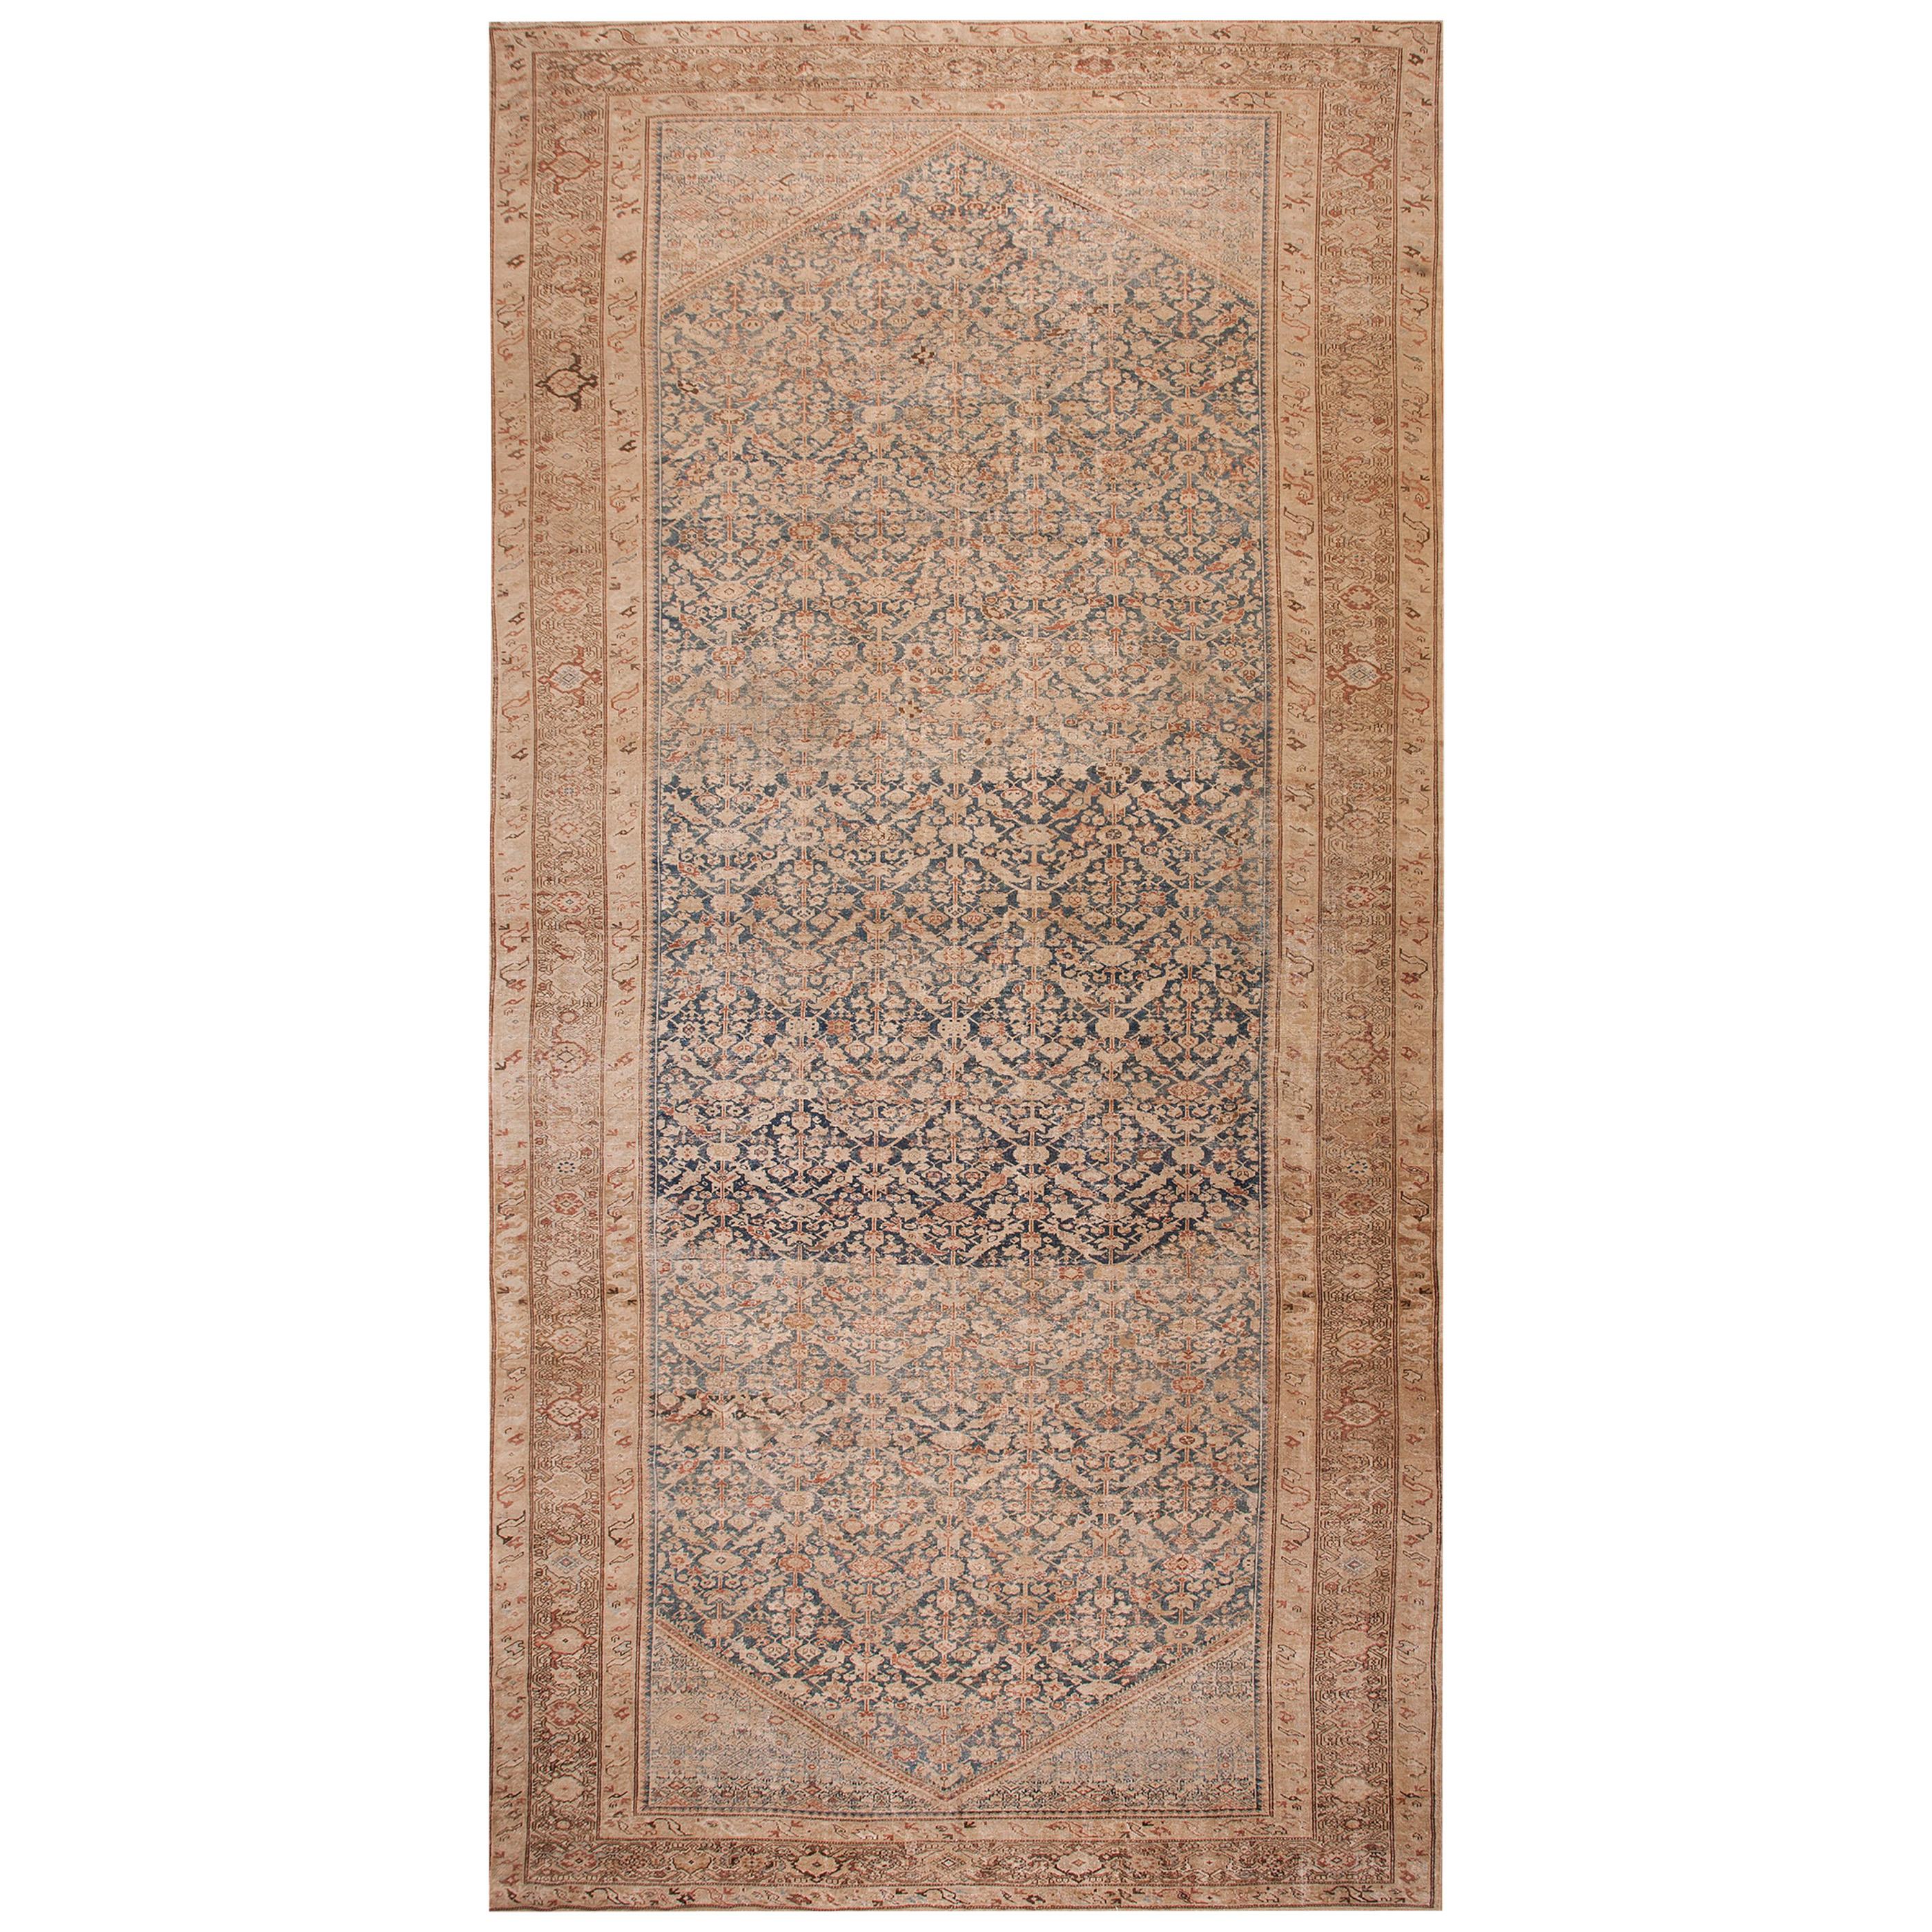 Early 20th Century Persian Malayer Carpet ( 10'3" x 20'9" - 312 x 632 ) For Sale